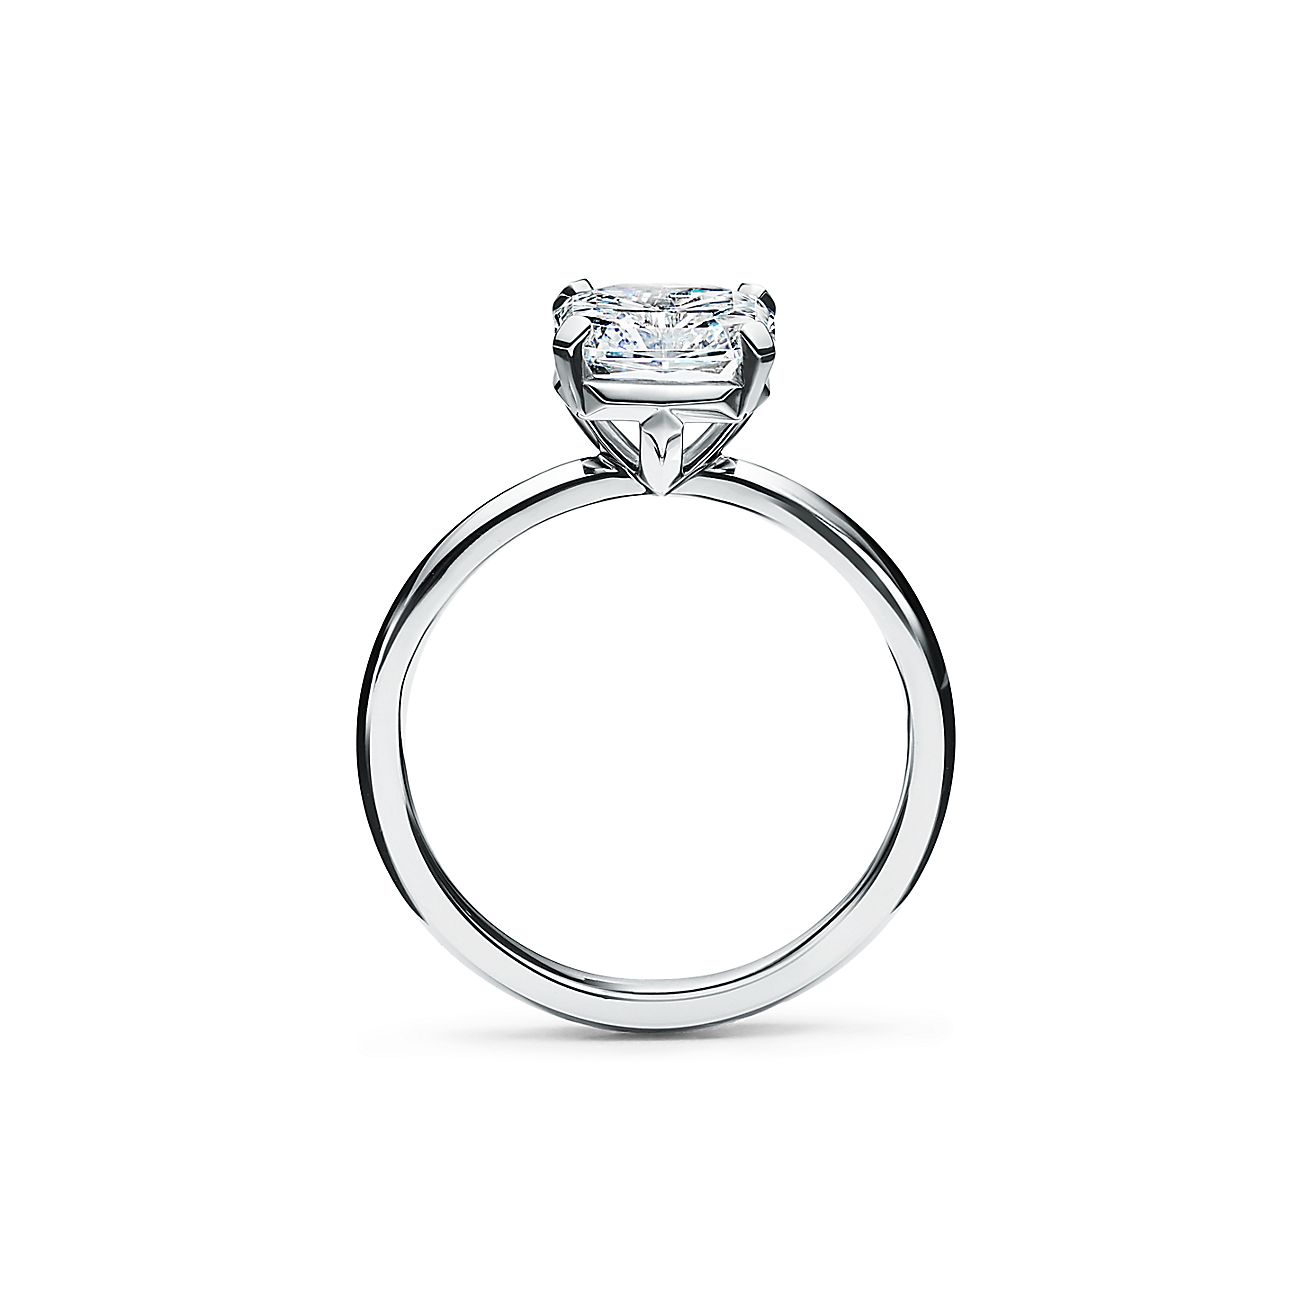 Tiffany True® Engagement Ring With A Tiffany True® Diamond And A ...